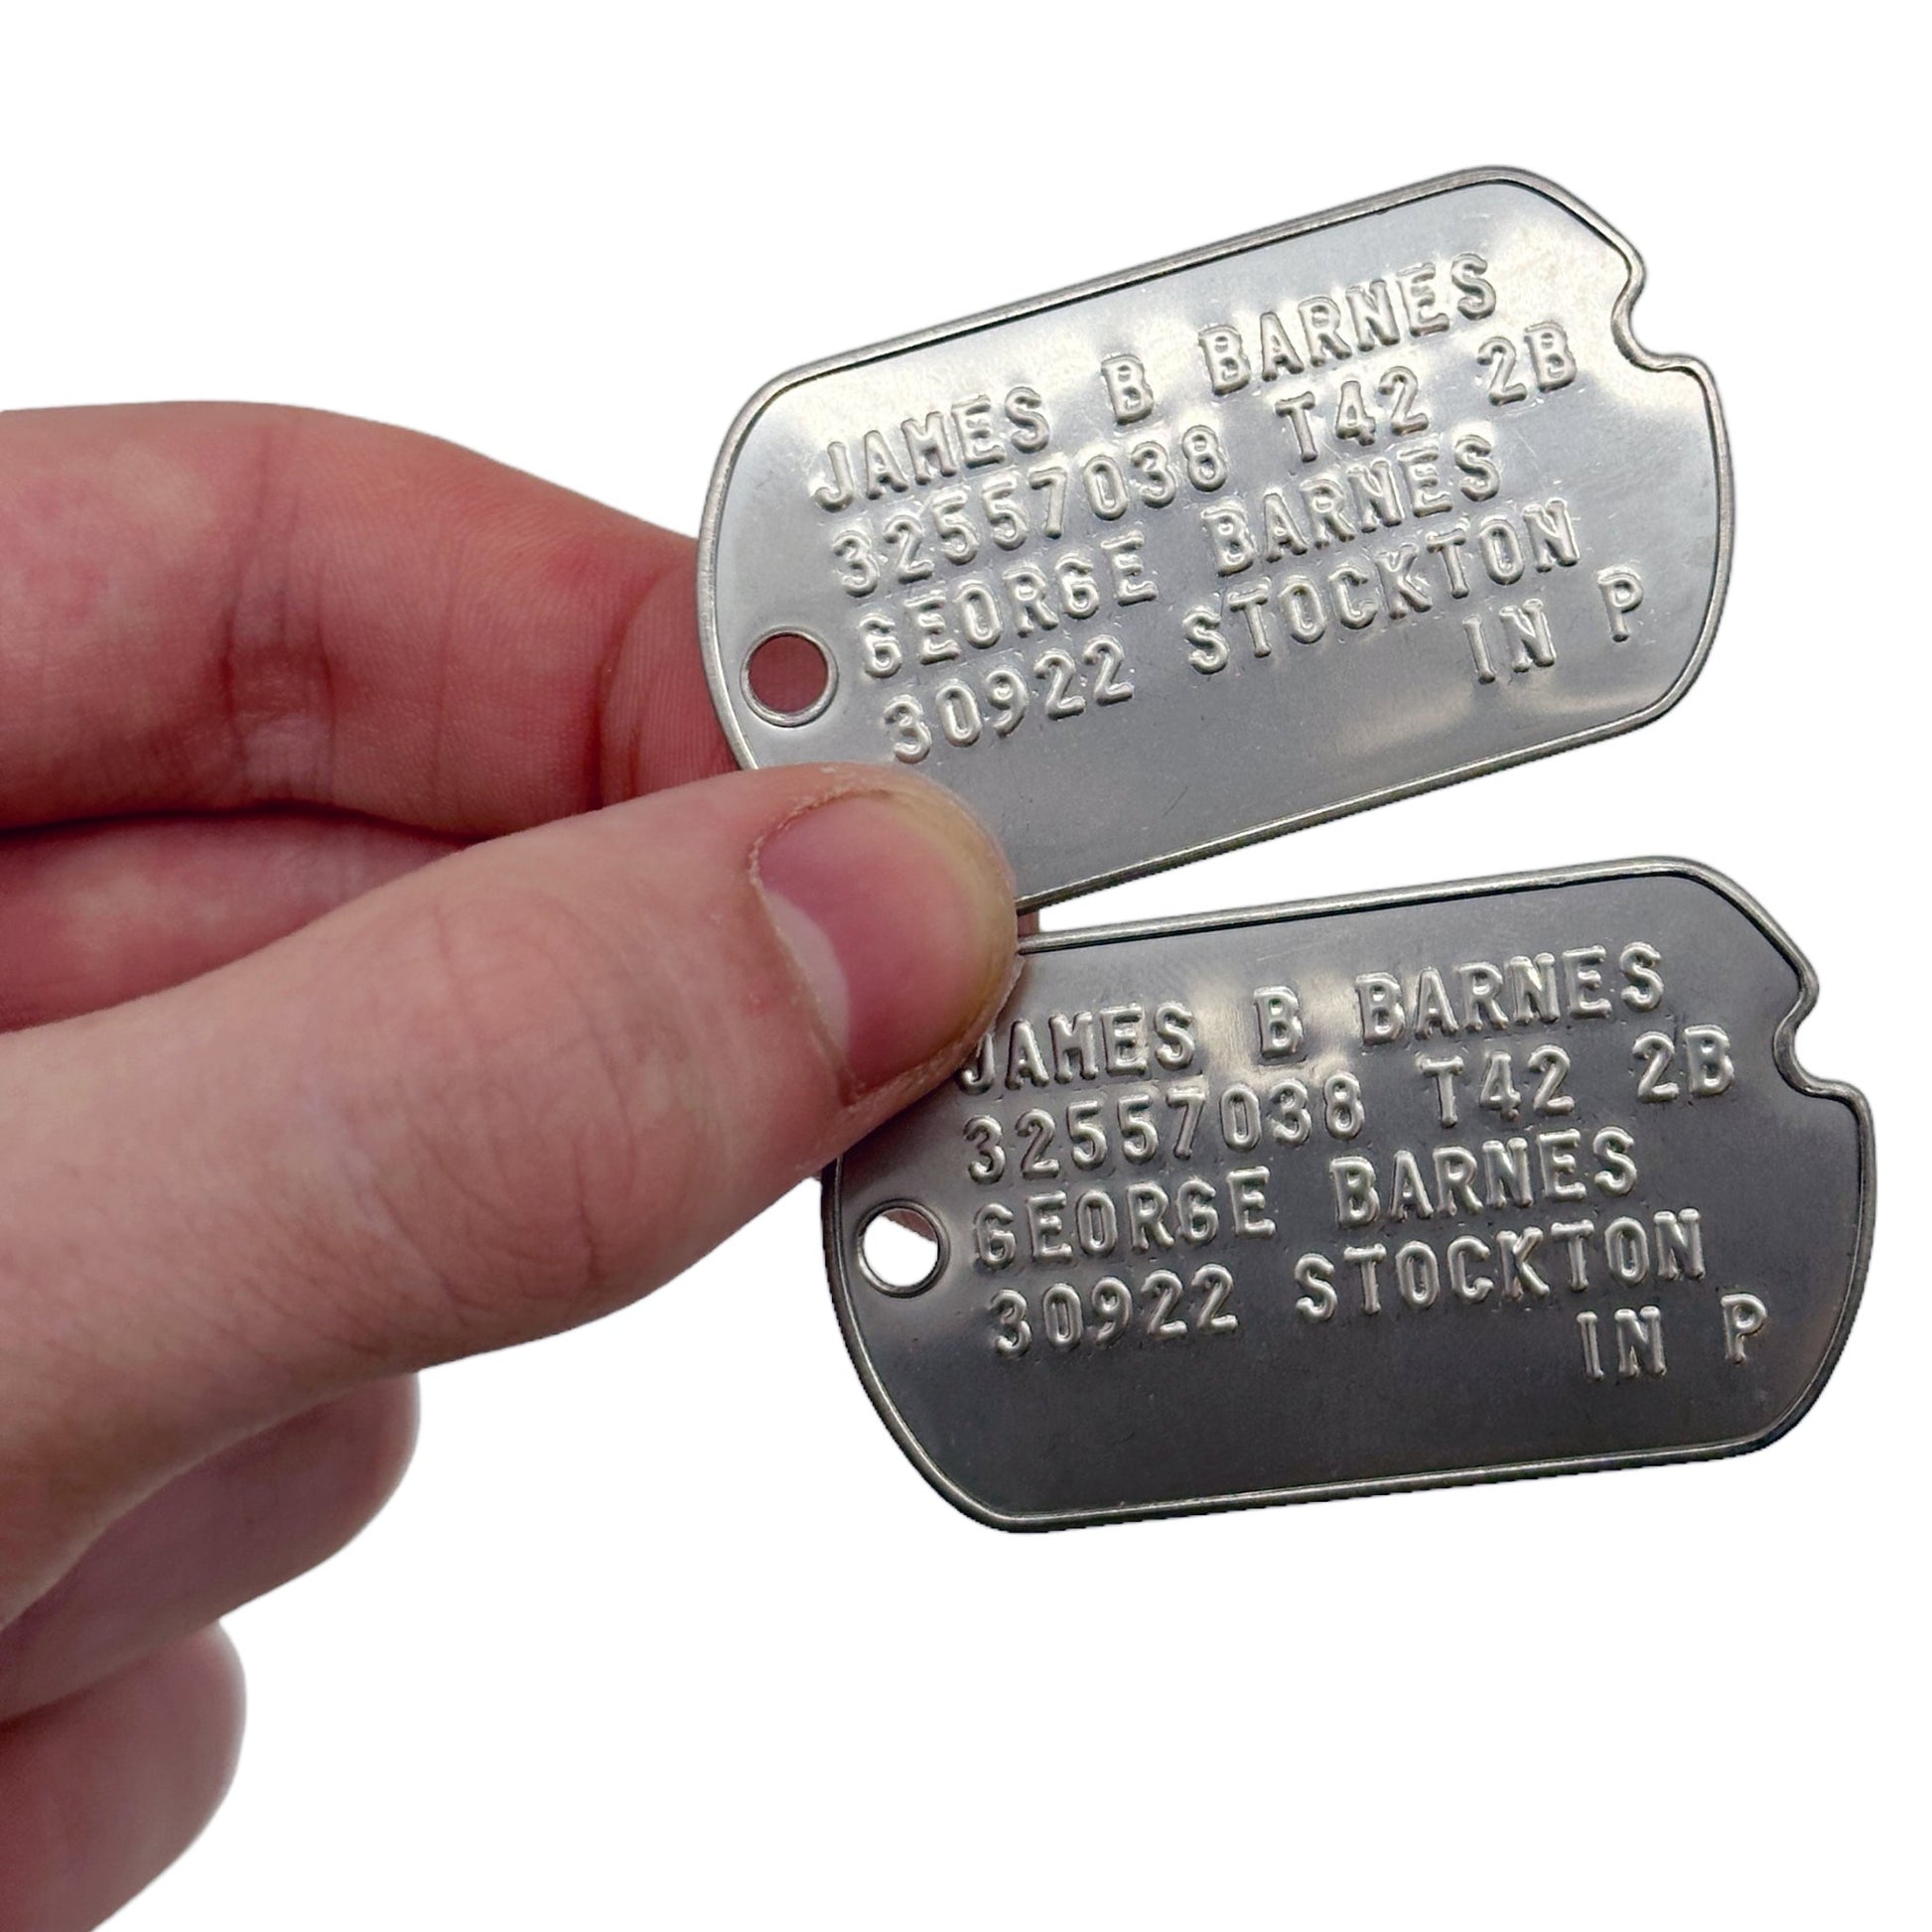 James 'Bucky' Barnes WWII Style Military Dog Tags Prop Replica - Notched pre 1965 WW2 - Stainless Steel - Chain Included - TheDogTagCo